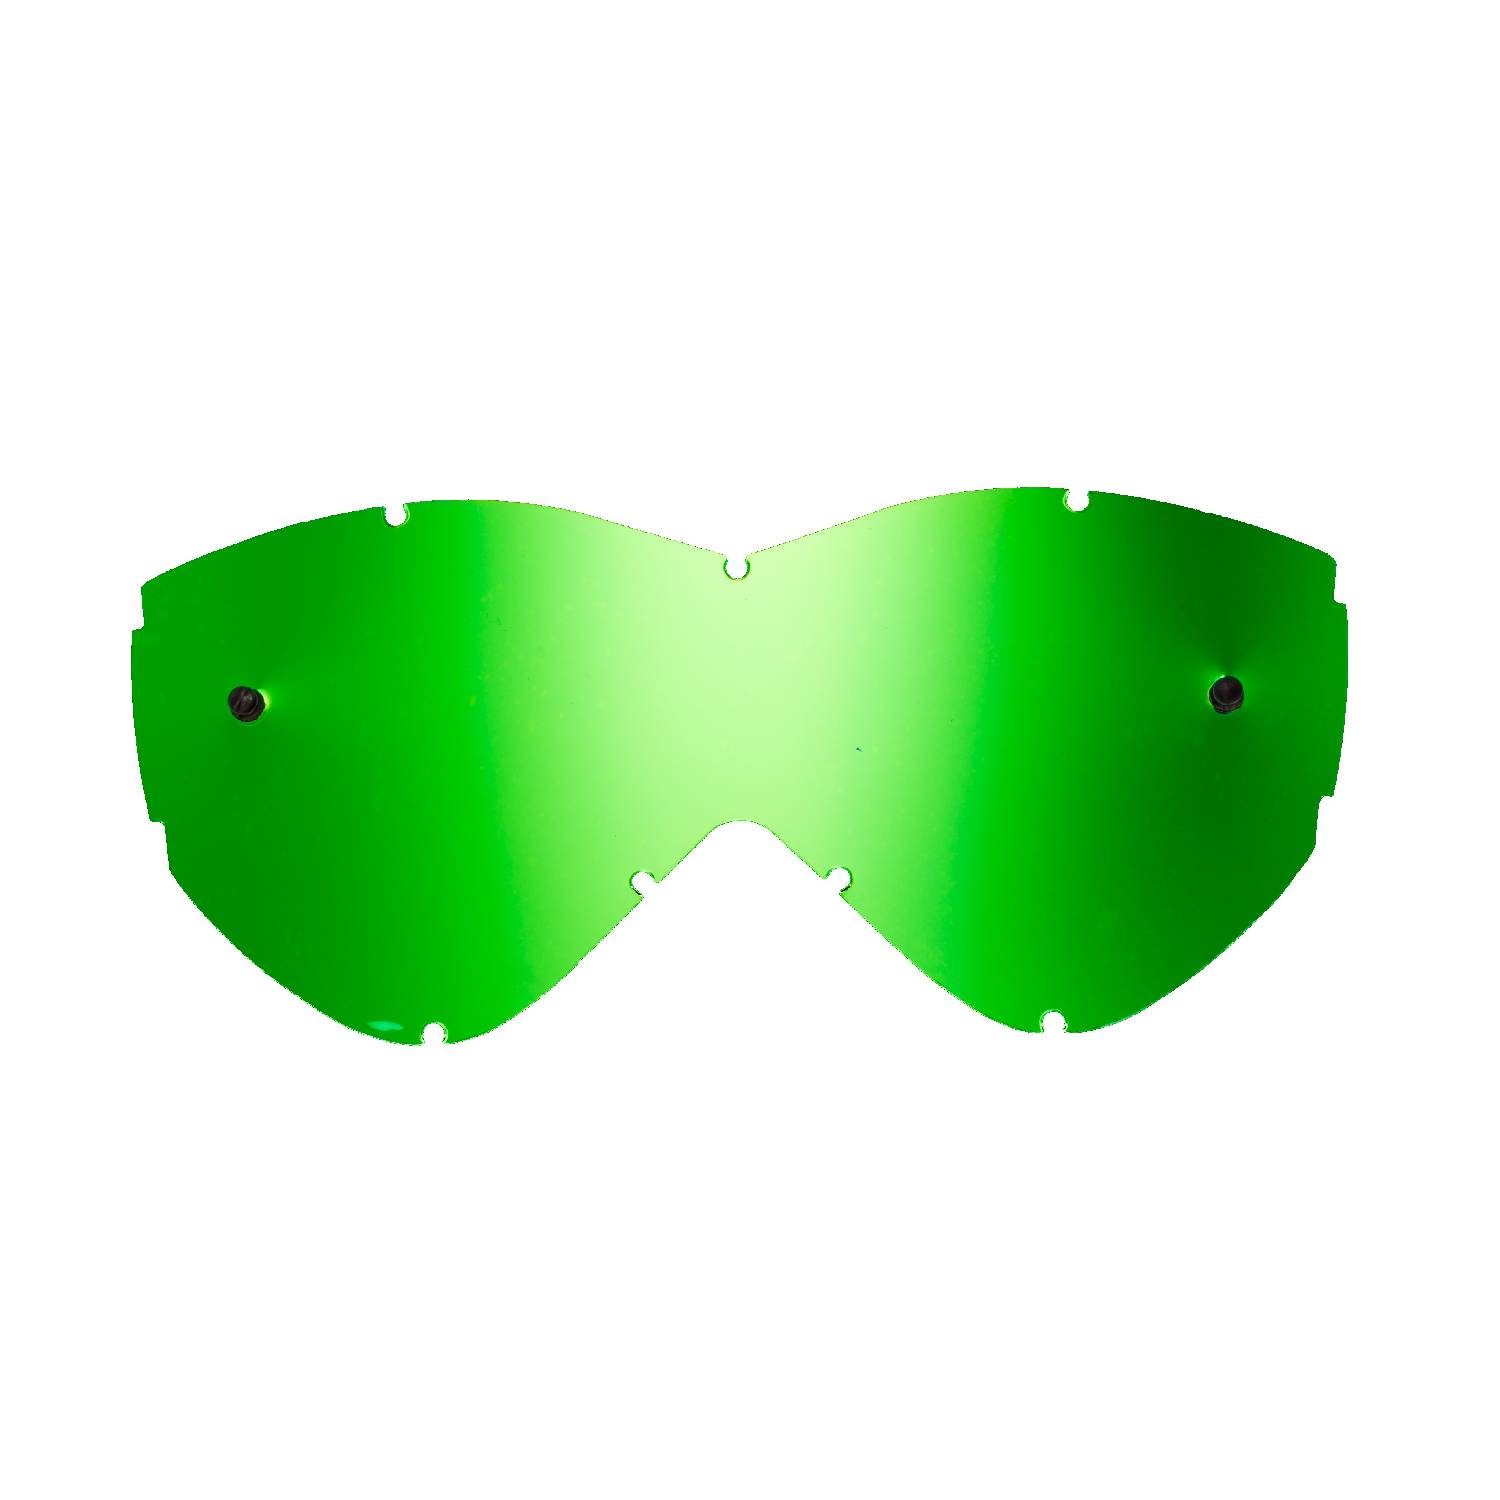 green-toned mirrored replacement lenses for goggles compatible for Smith Warp goggle